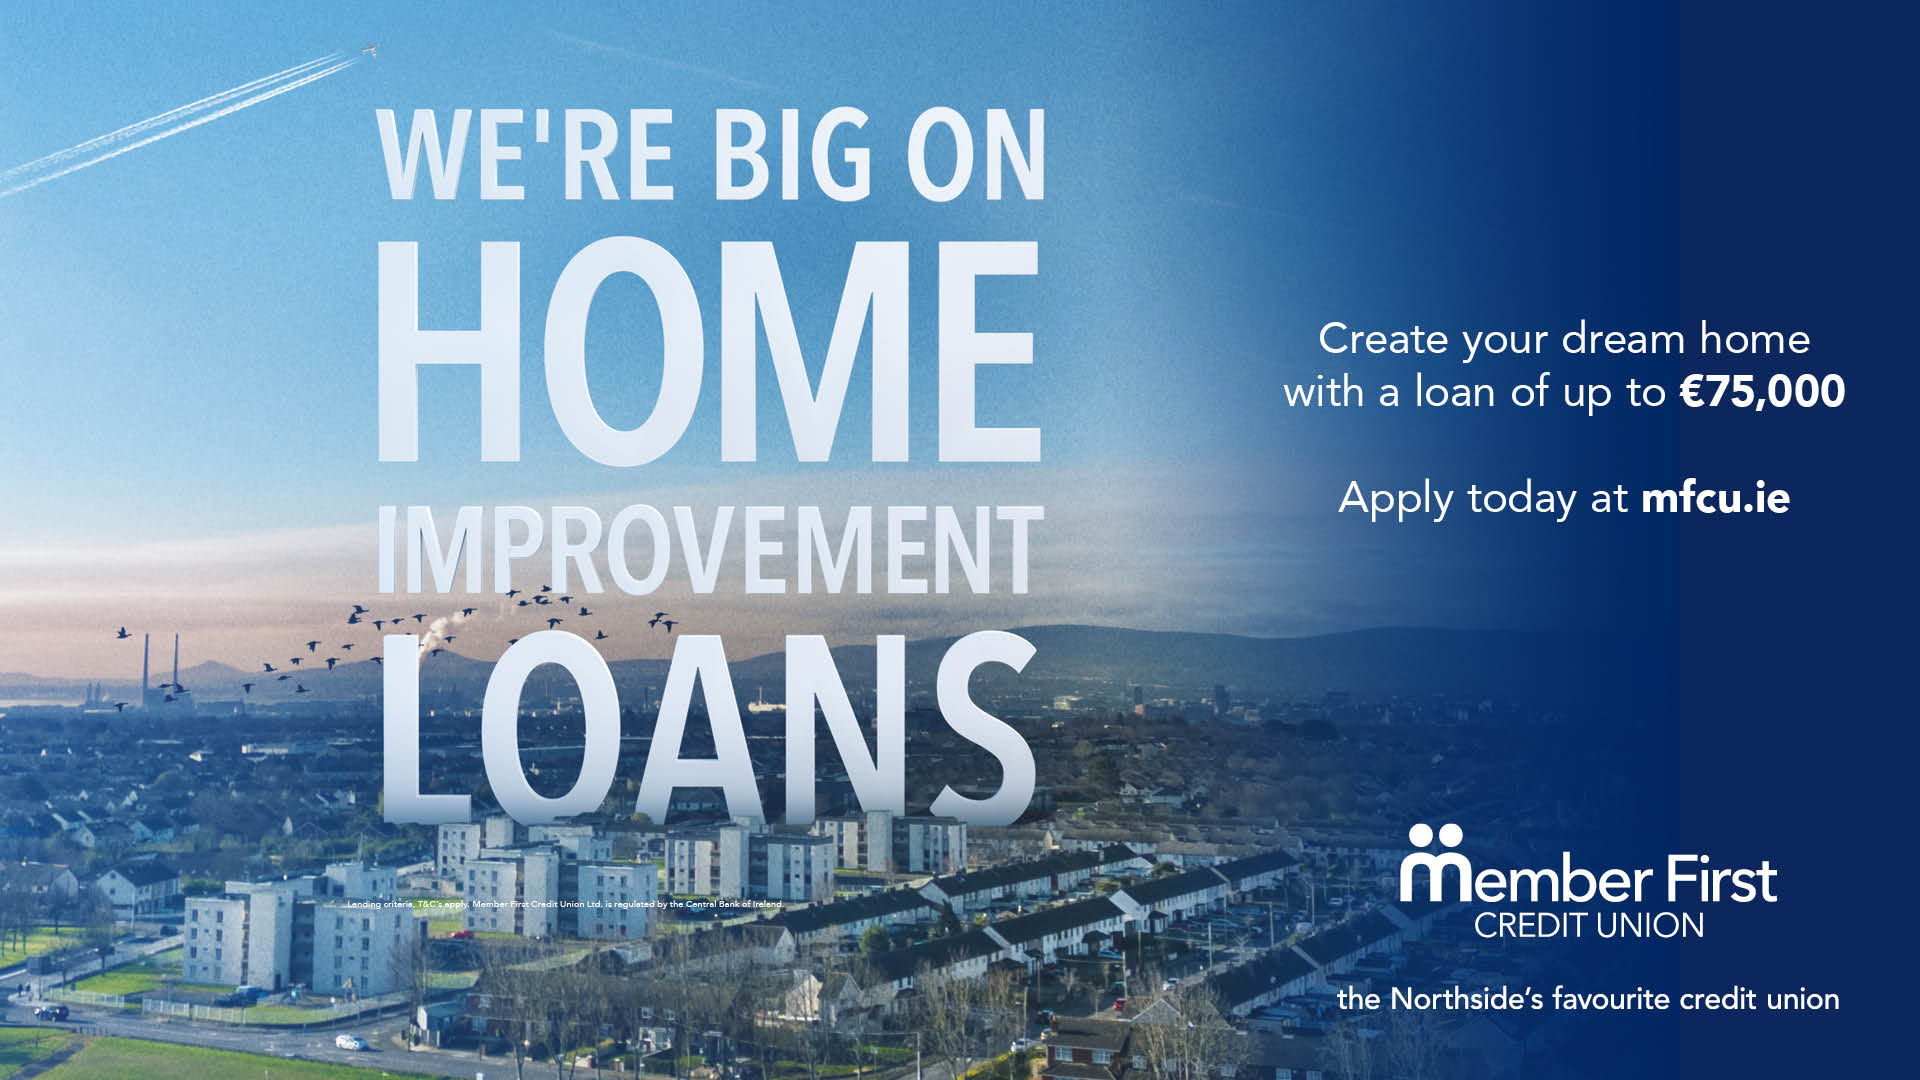 MFCU launches new Marketing Campaign – “We’re BIG on Loans”